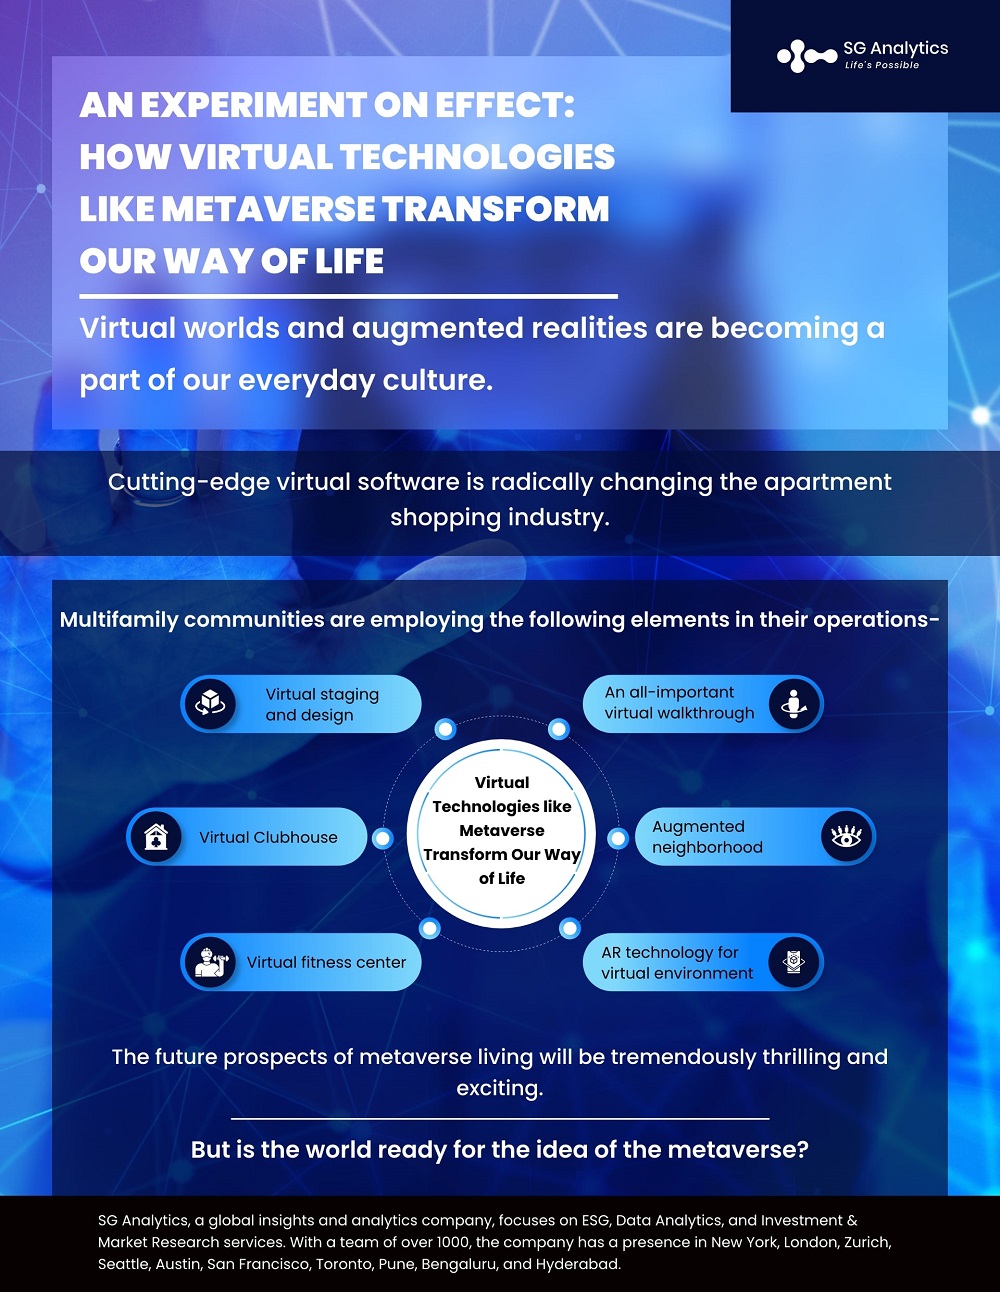 SGAnalytics_Blog_Infographic_An Experiment on Effect How Virtual Technologies like Metaverse Transform Our Way of Life